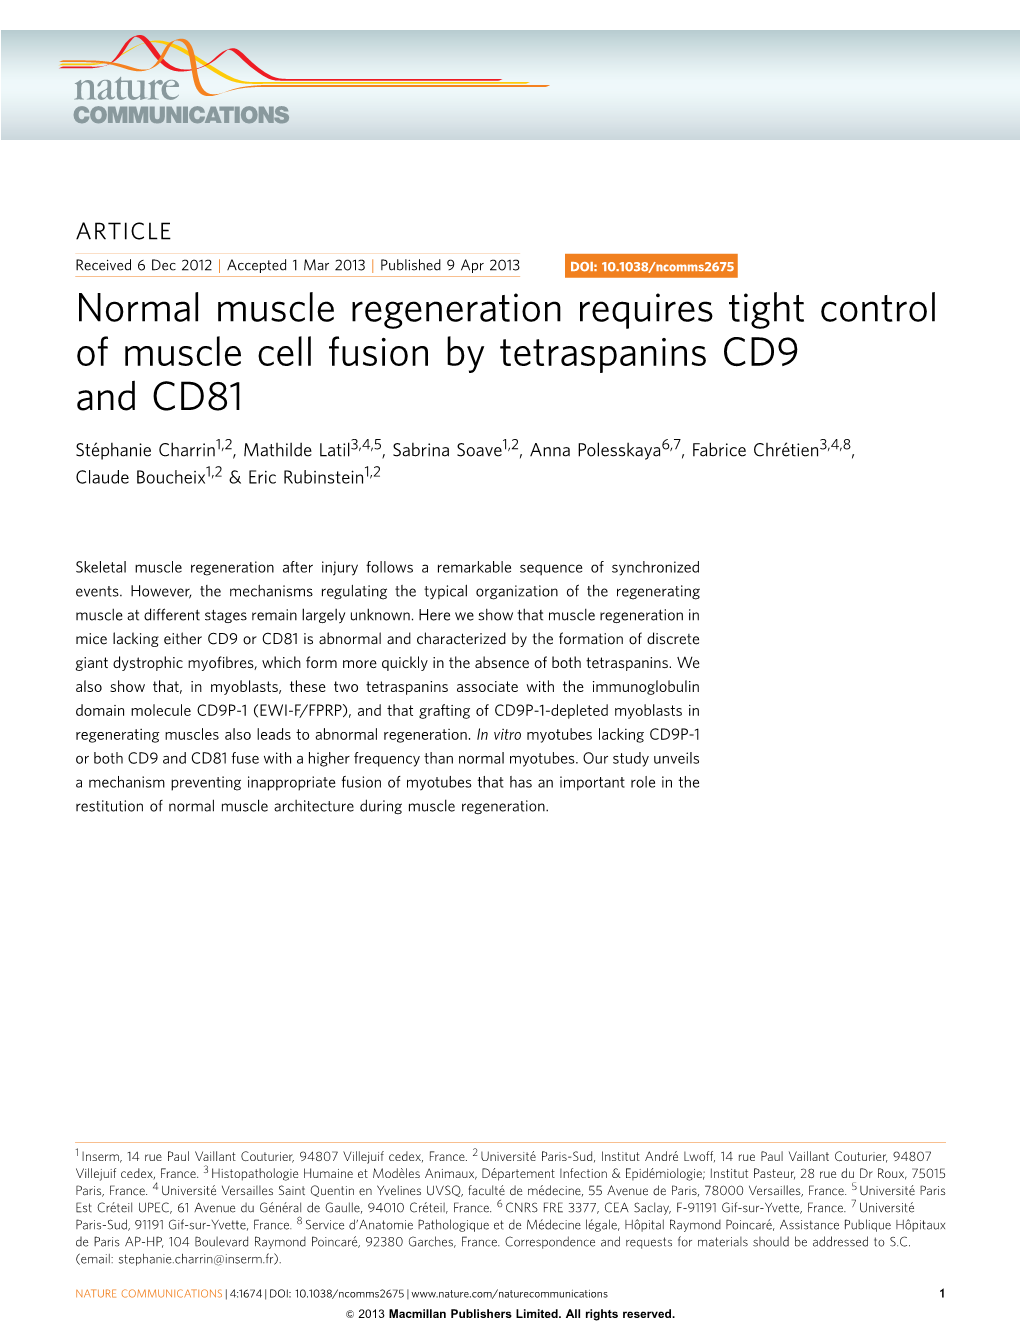 Normal Muscle Regeneration Requires Tight Control of Muscle Cell Fusion by Tetraspanins CD9 and CD81